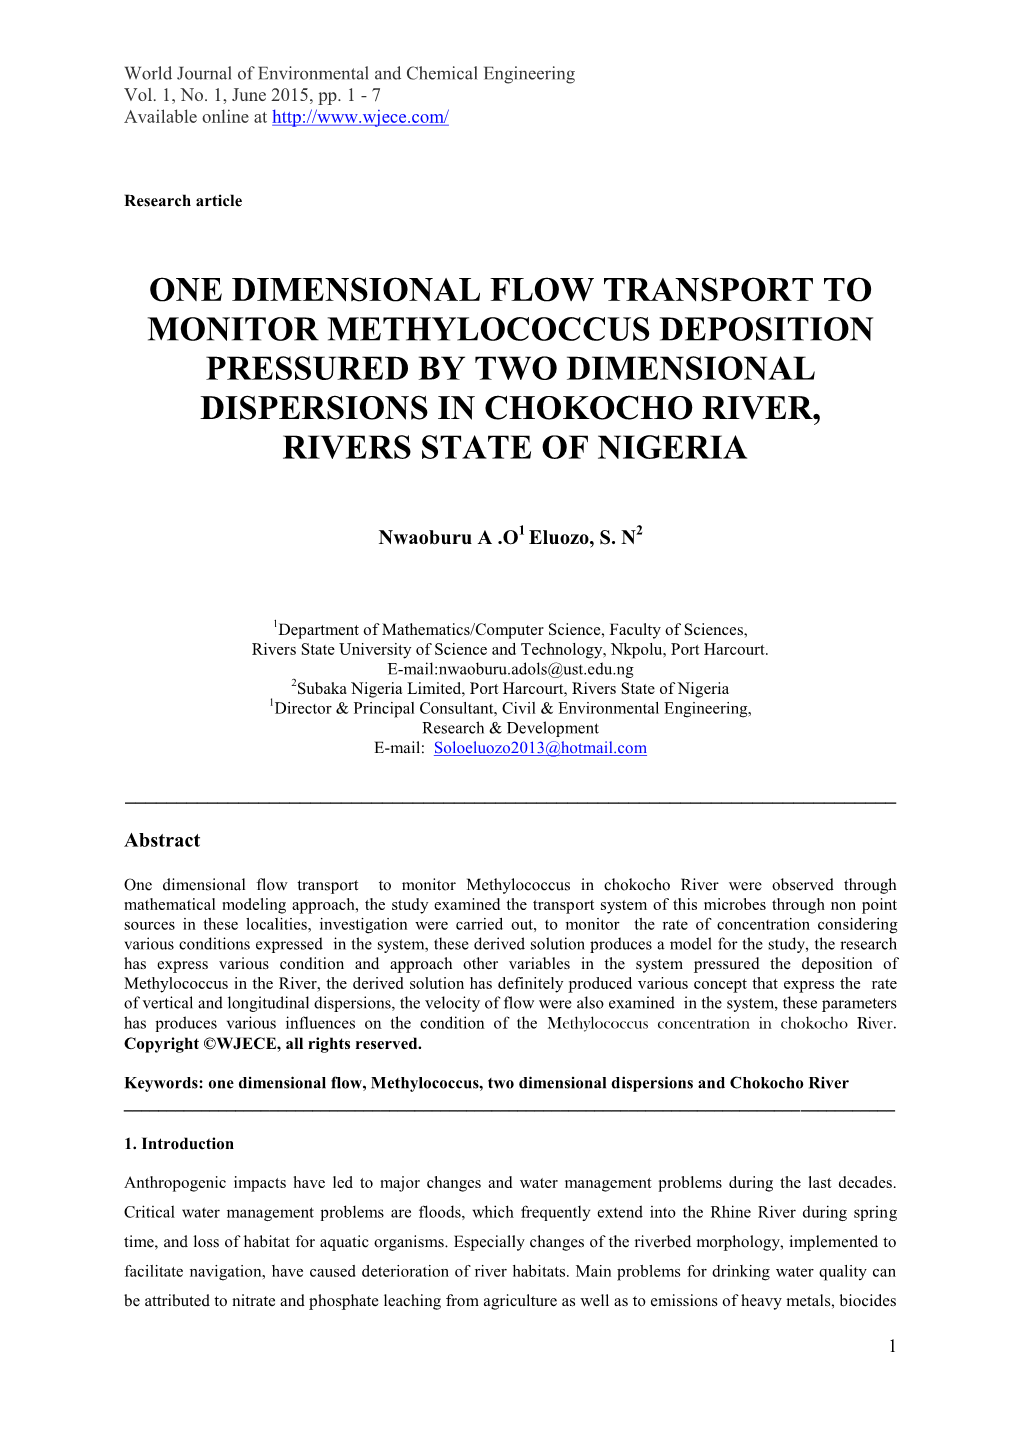 One Dimensional Flow Transport to Monitor Methlococuss Deposition